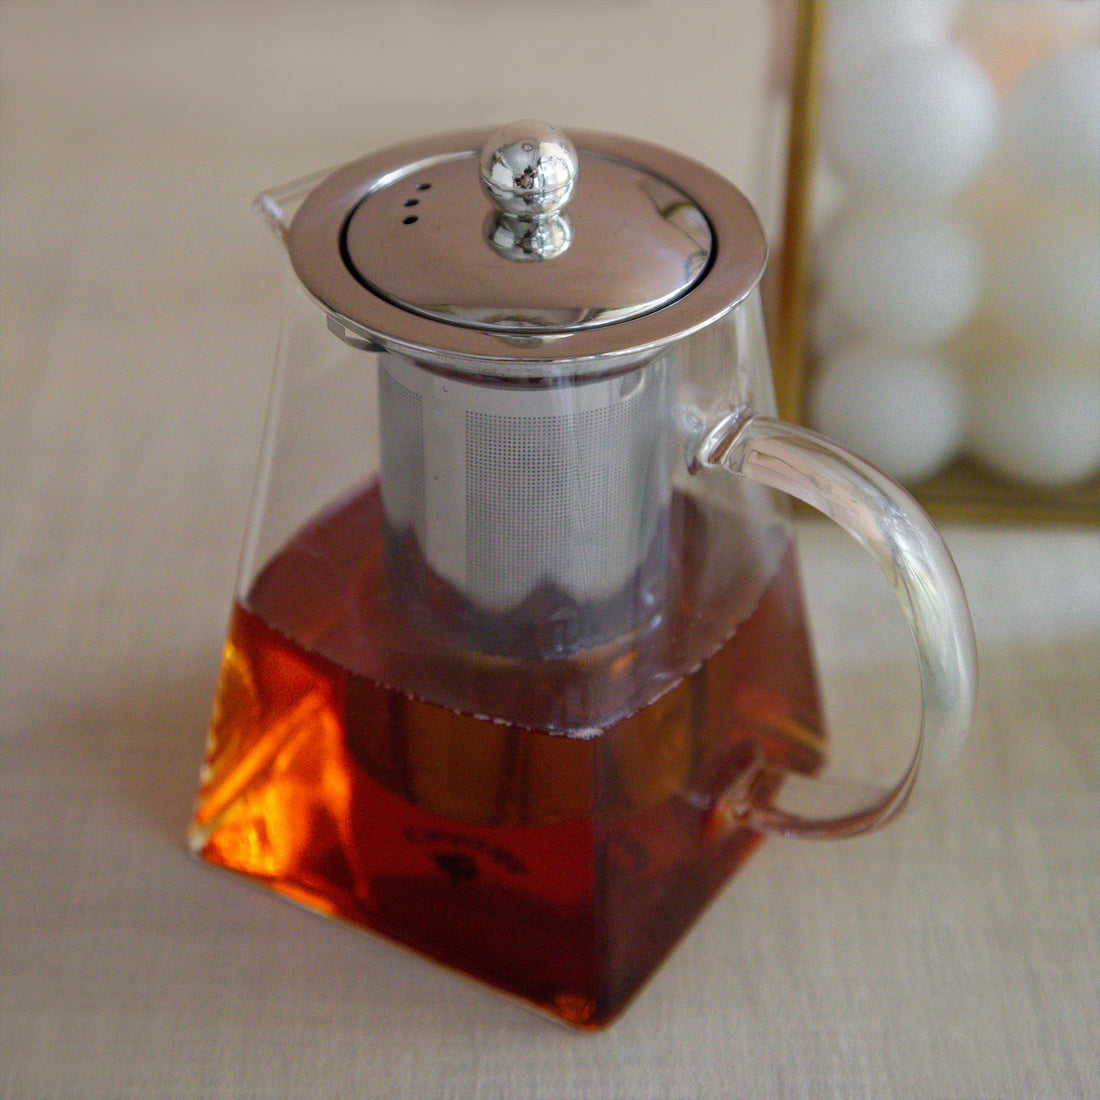 Pyramid Shaped Borosilicate Glass Kettle With Steel Infuser - 720 ML